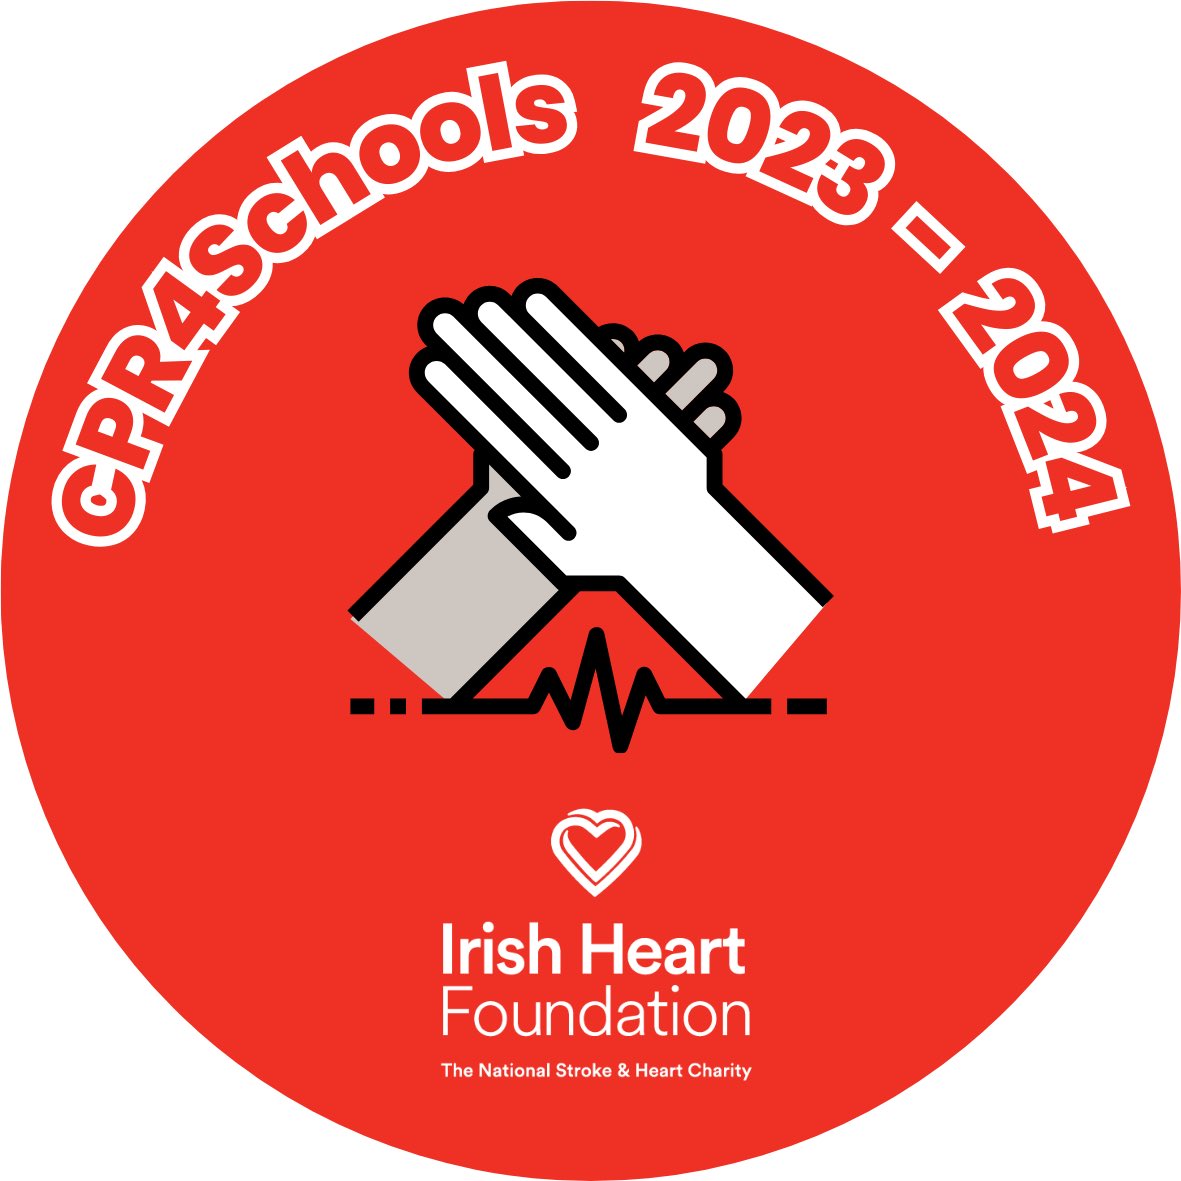 We are thrilled to have have won the CPR4Schools Award!! This is an incredible achievement and a testament to the dedication and hard work of the staff and students who are involved in training our whole school in the lifesaving skill of CPR ❤️ @Irishheart_ie @LCETBSchools